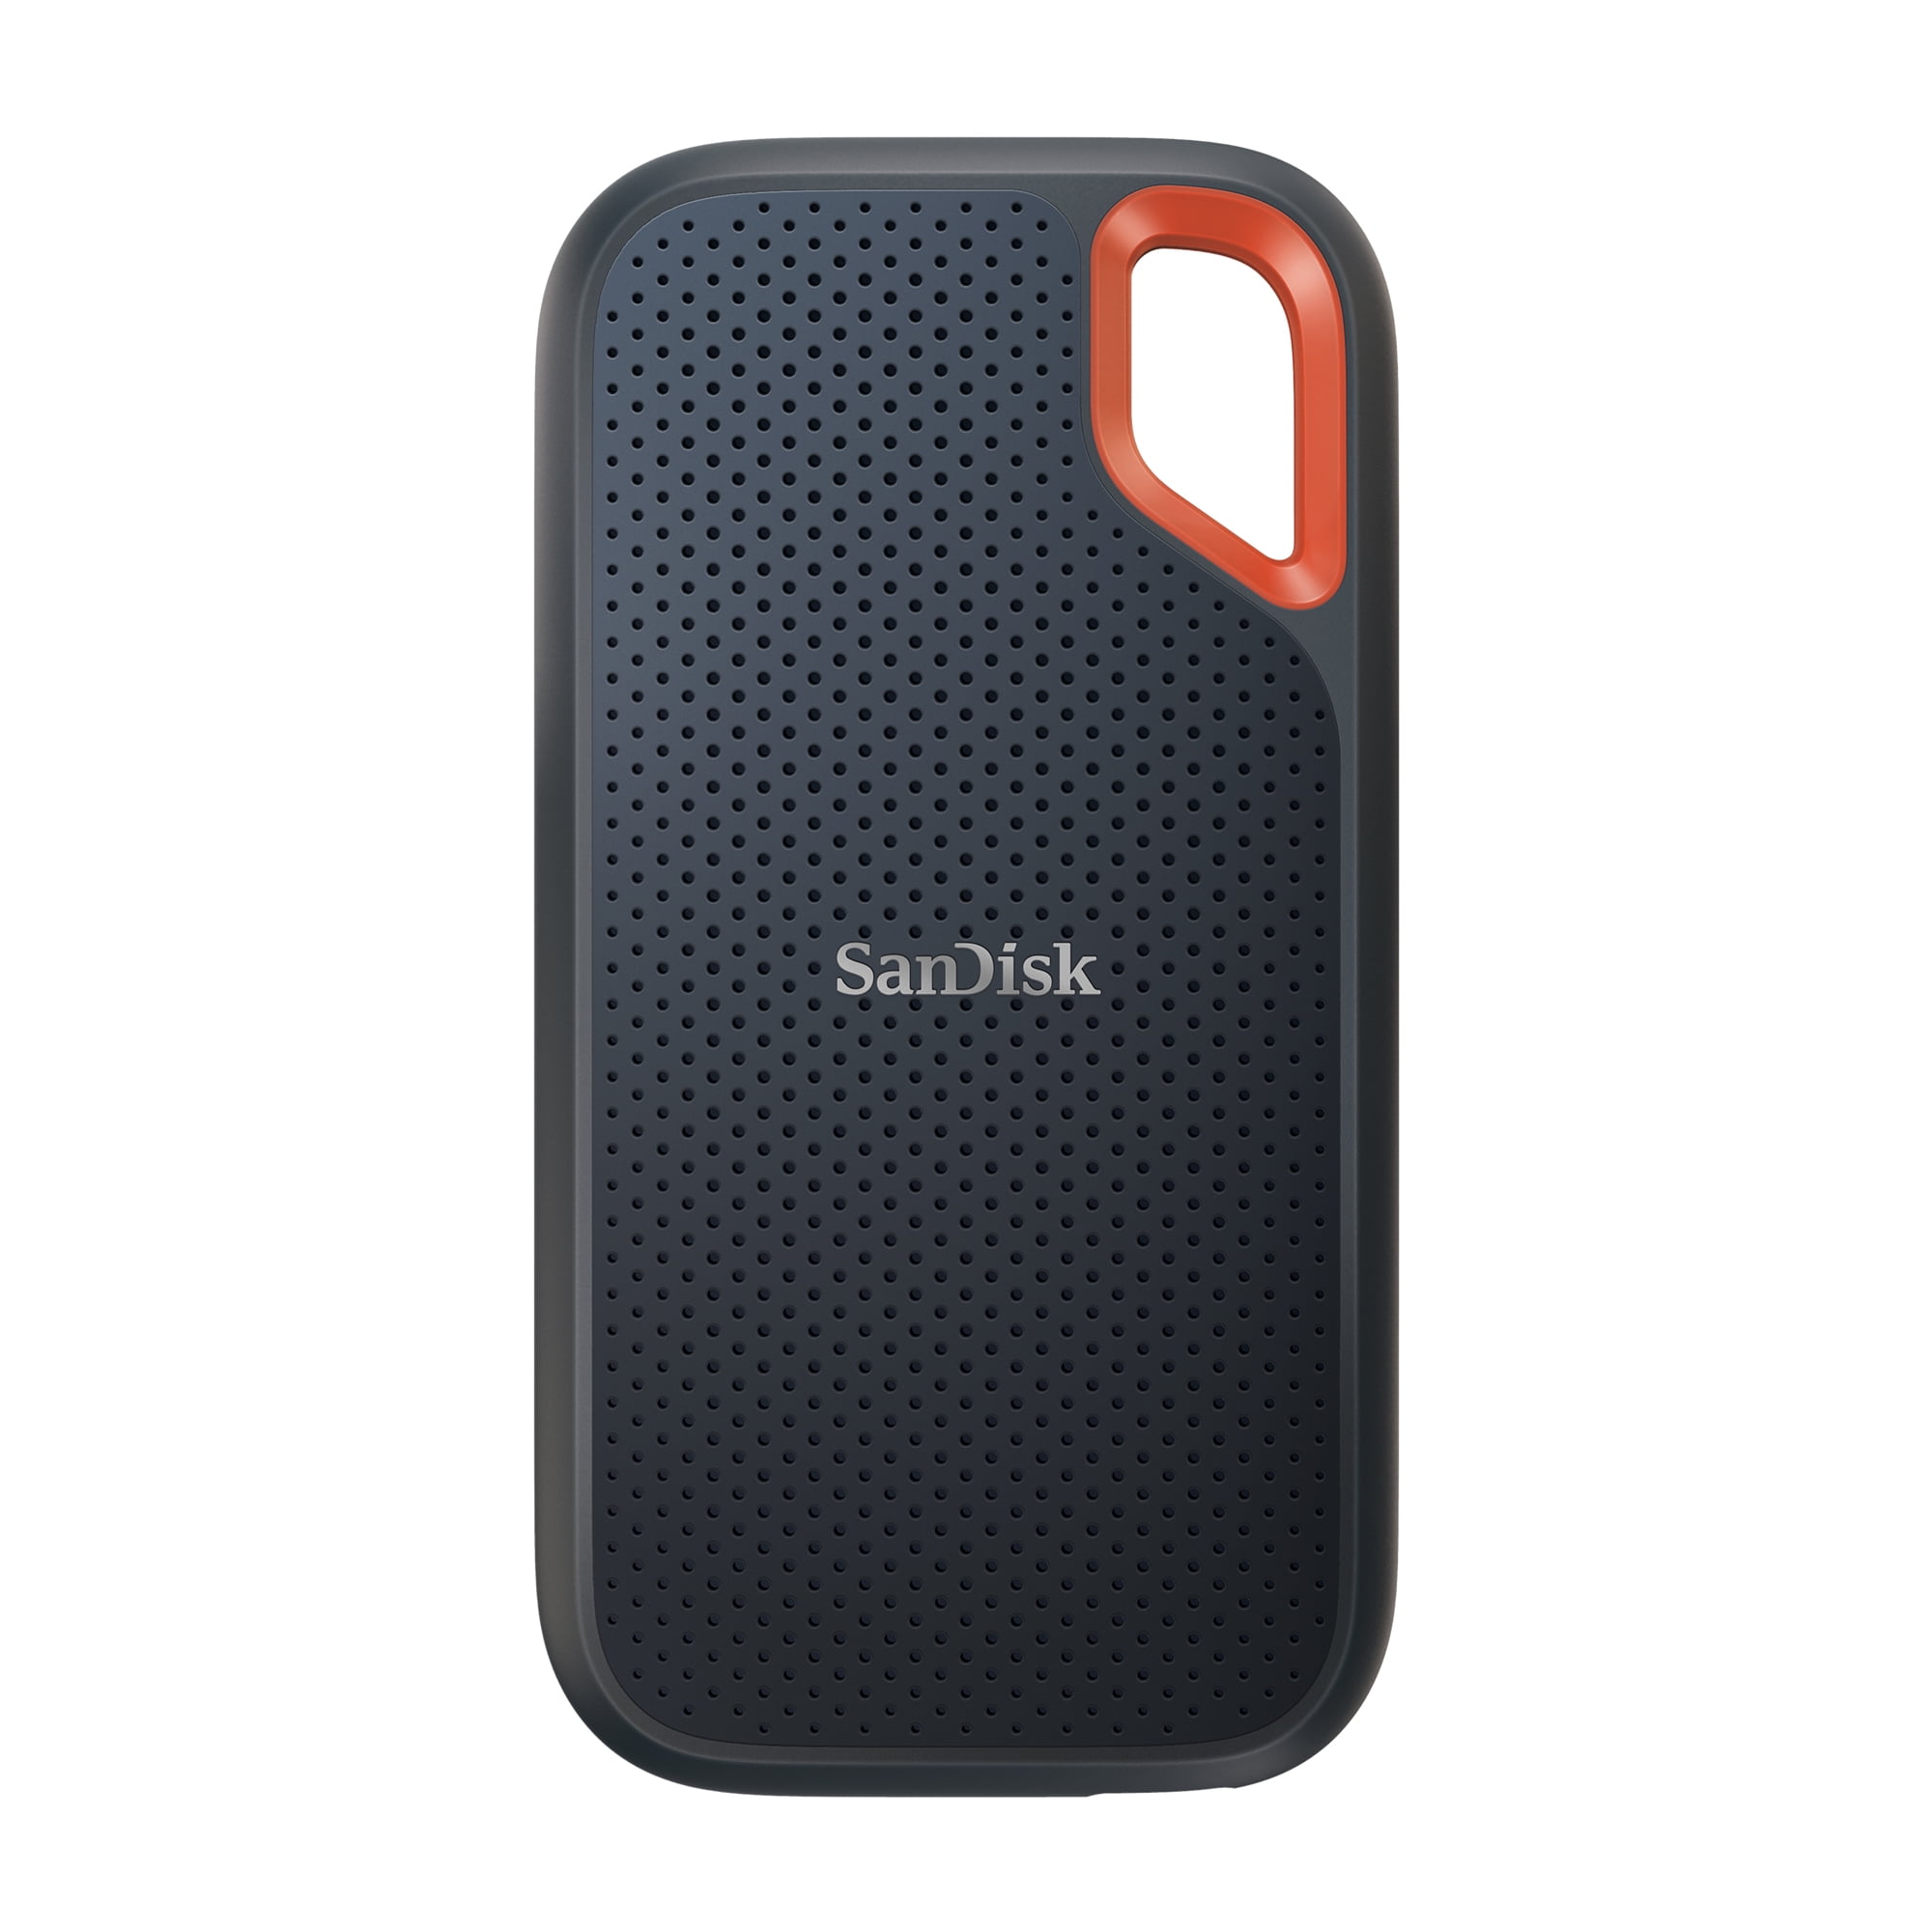 SanDisk Extreme Portable SSD - 2TB